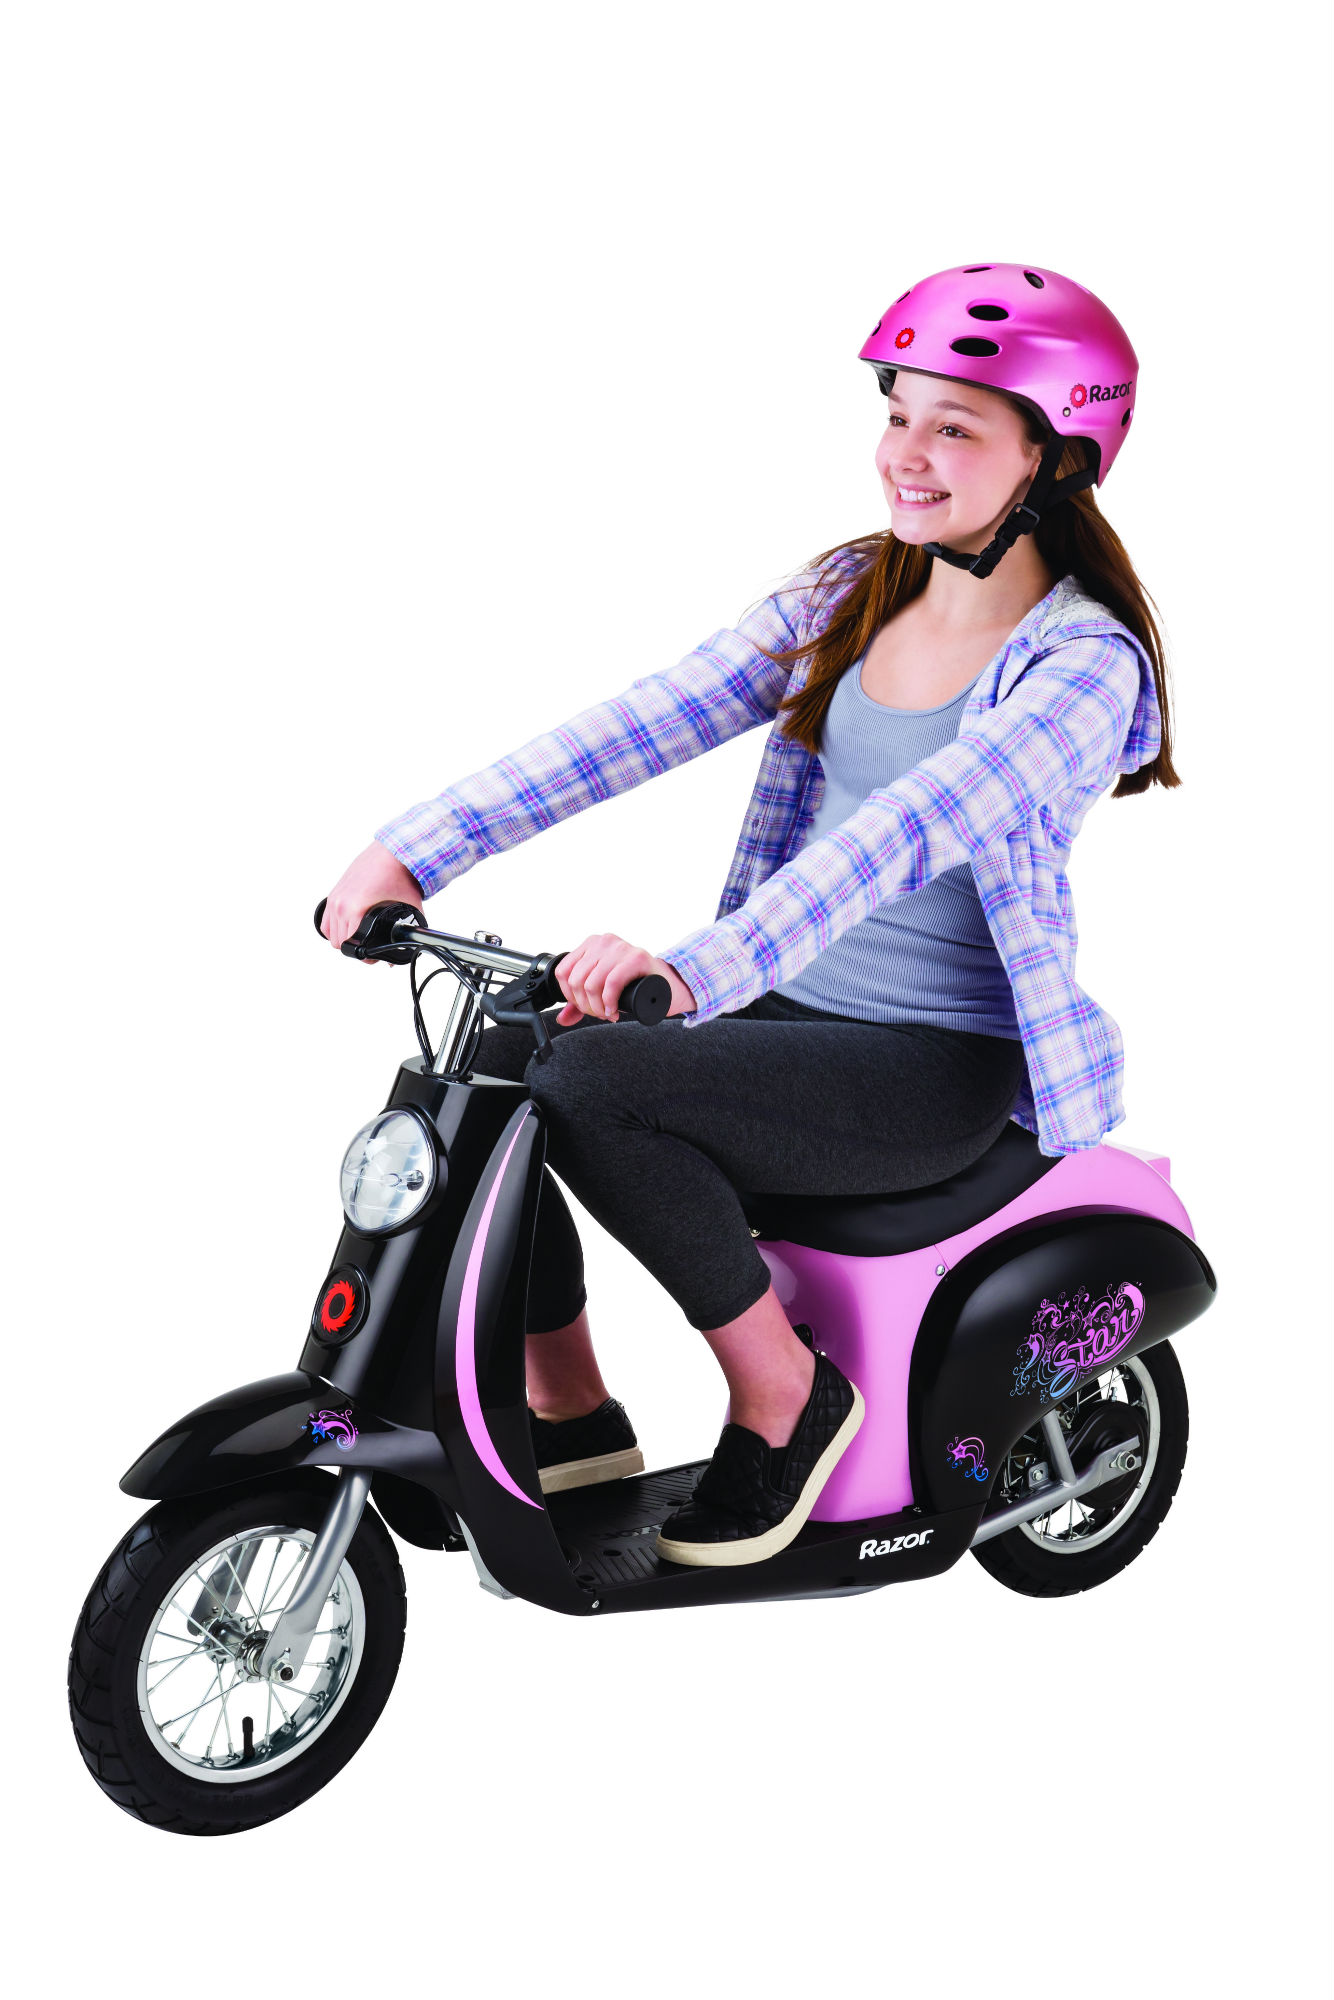 pink razor electric scooter